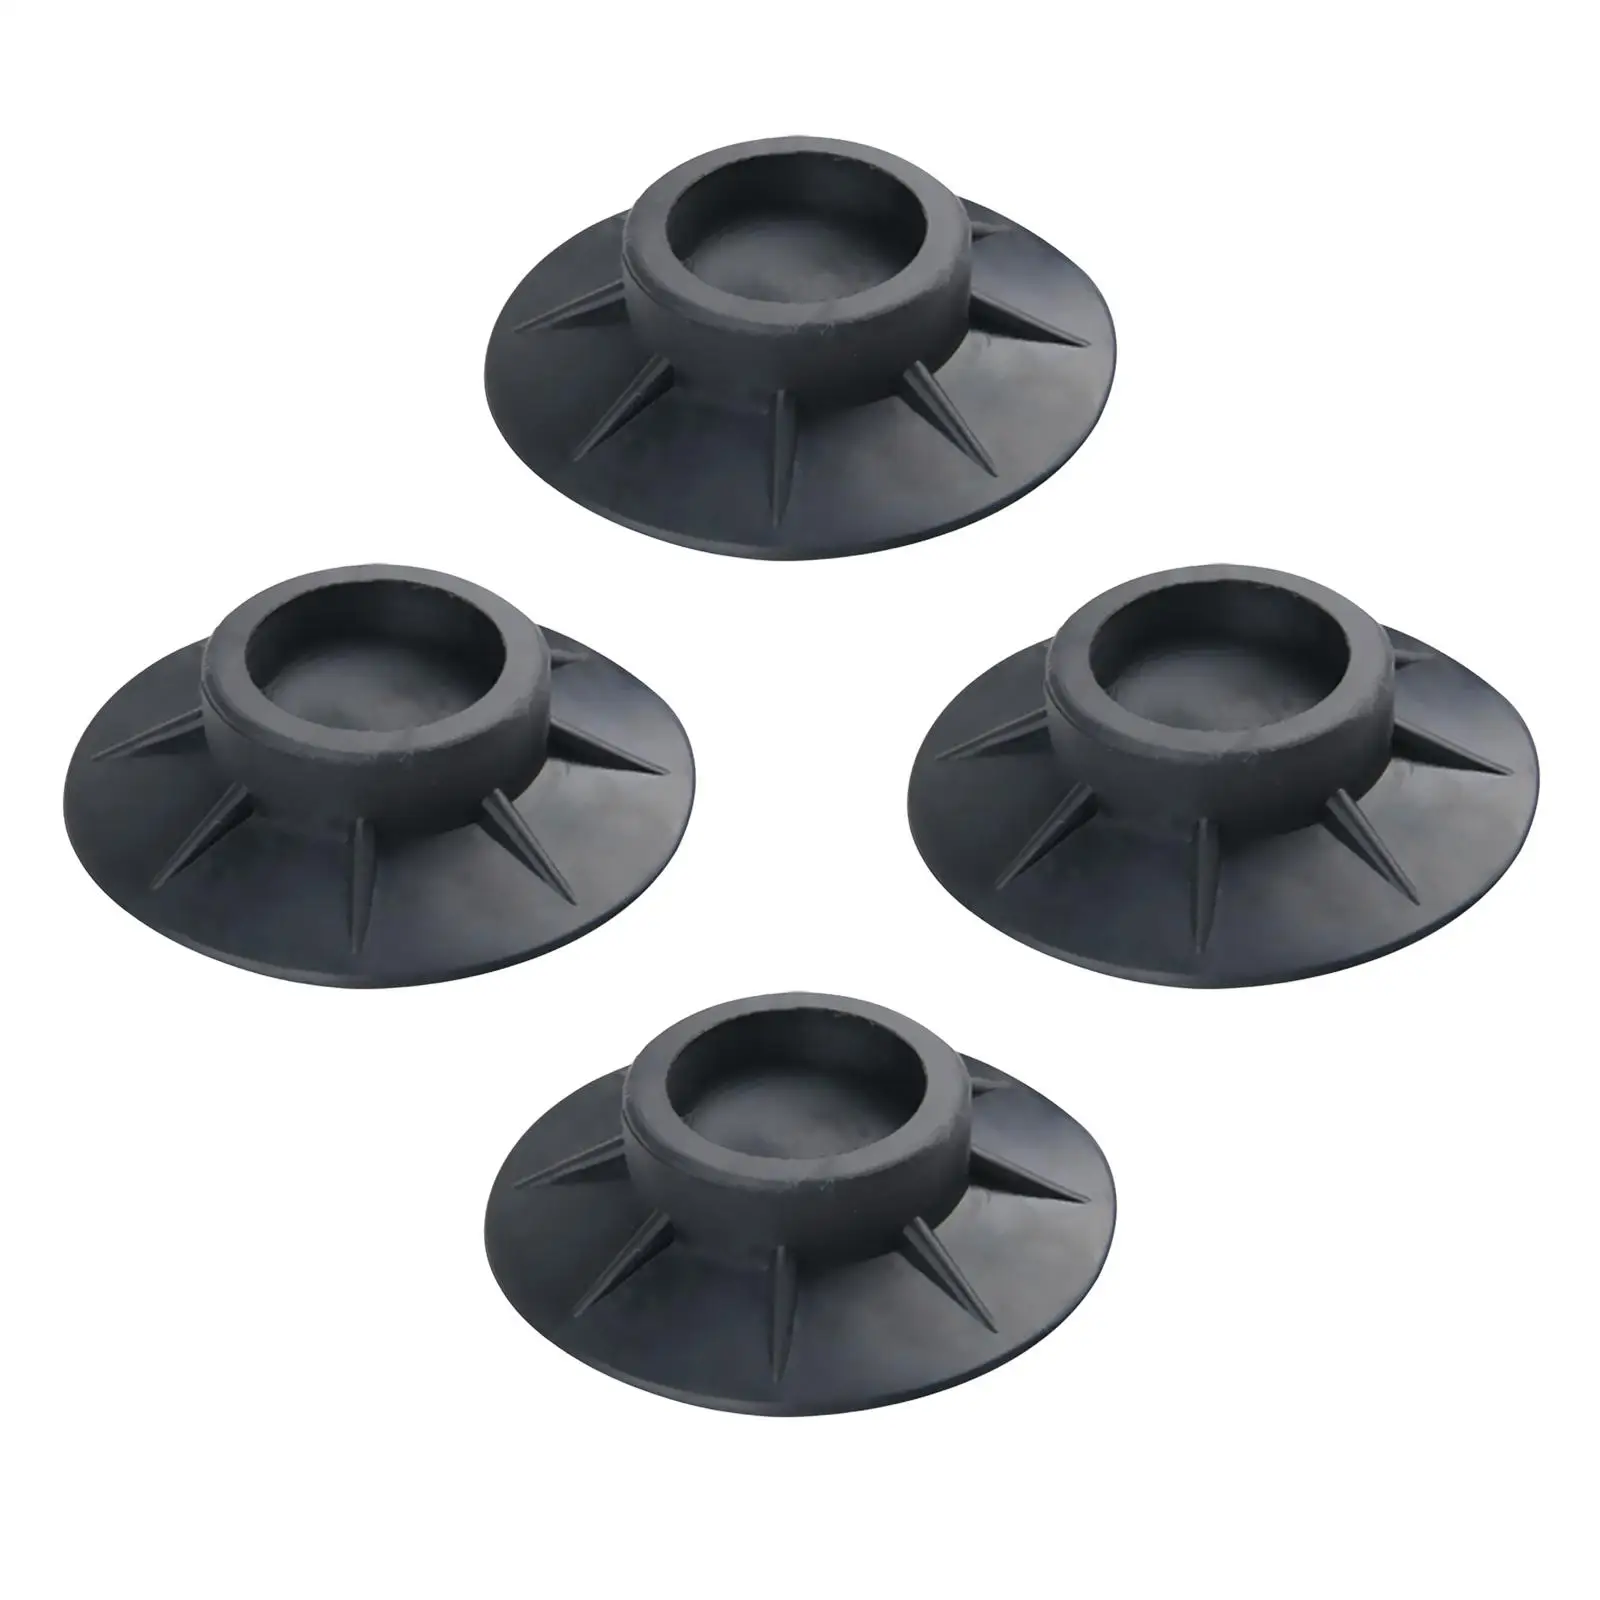 4 Pieces Non-Slip Pad of Washing Machine Rubber Stand Covers for Dishwashers